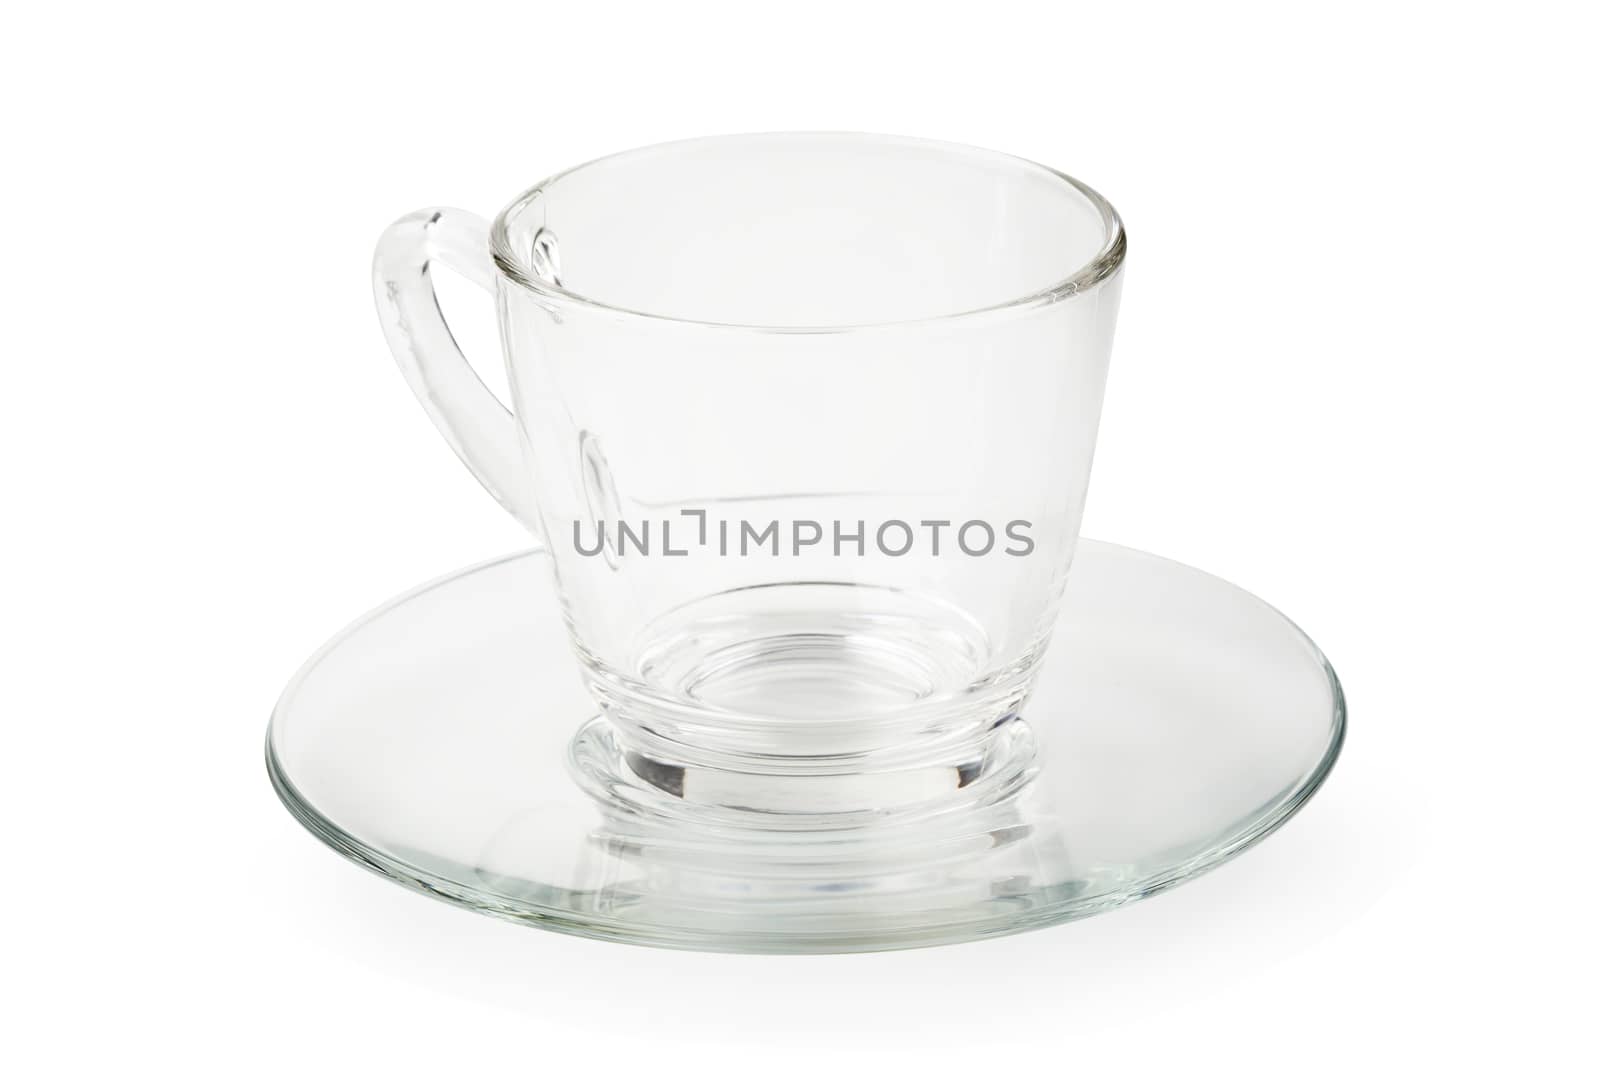 Empty glass cup of tea or coffee with handle isolated on white background.